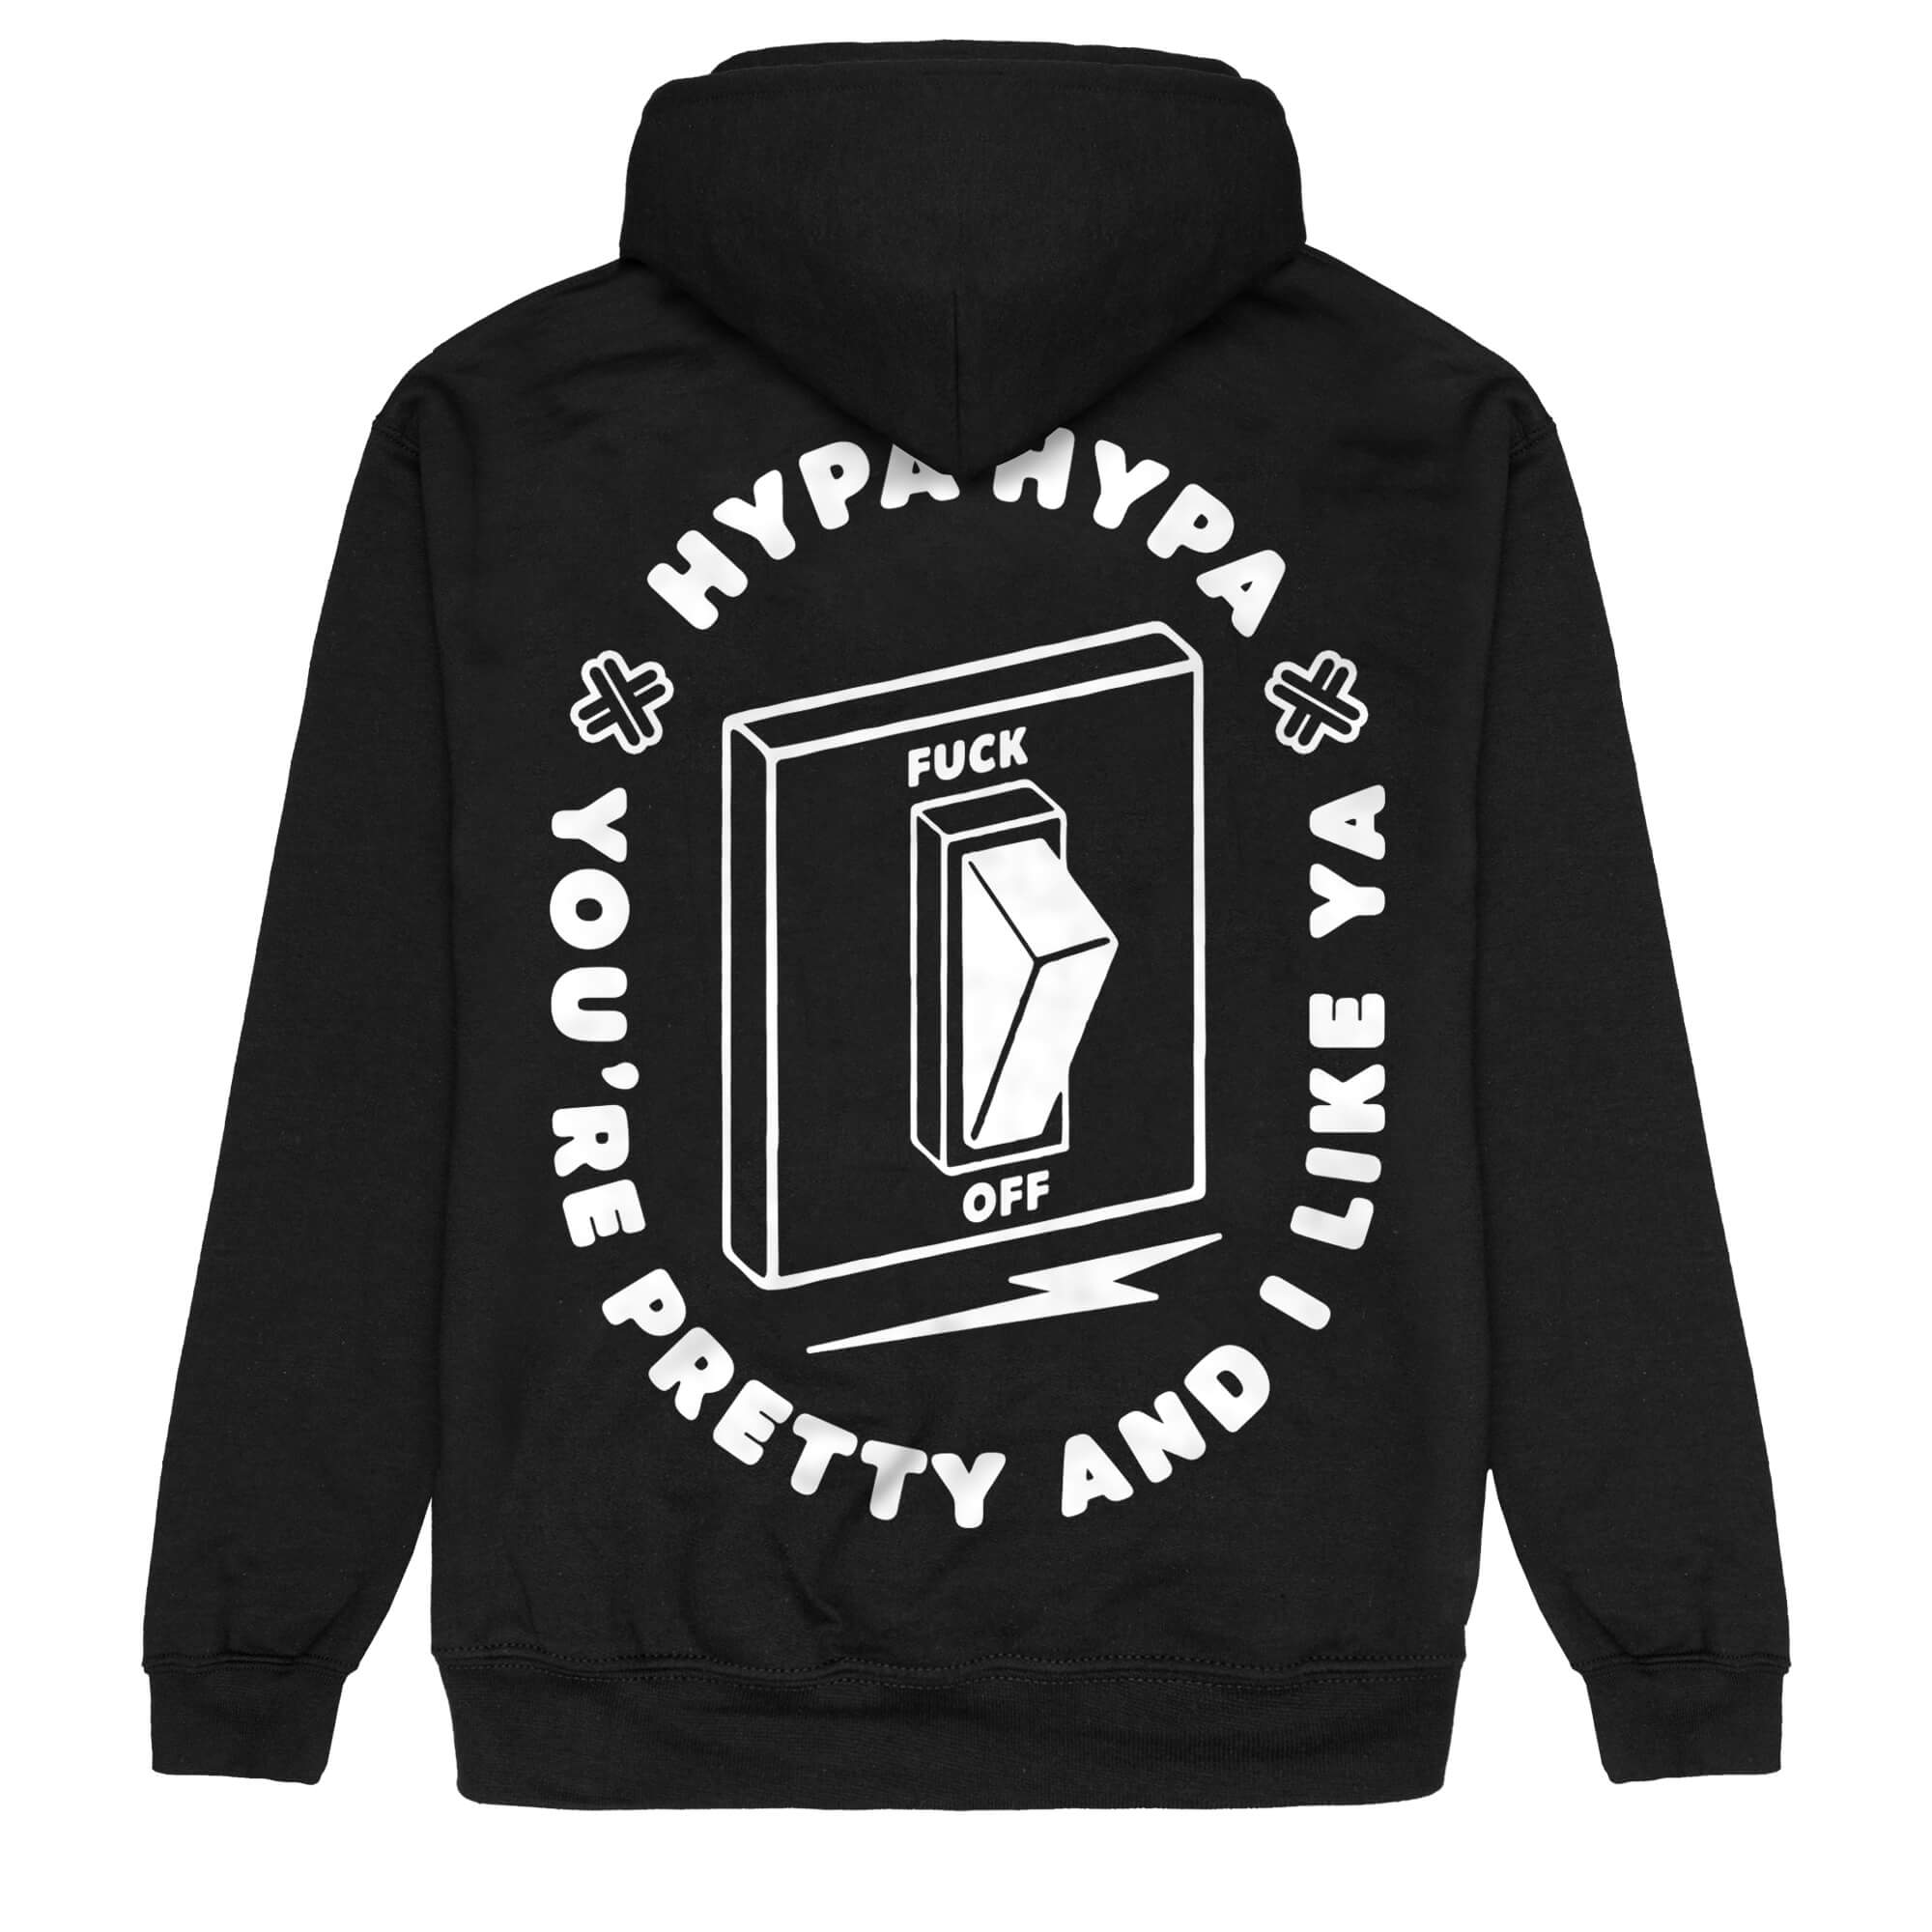 Electric Callboy - Hypa Hypa Switch Zip-Up Hoodie